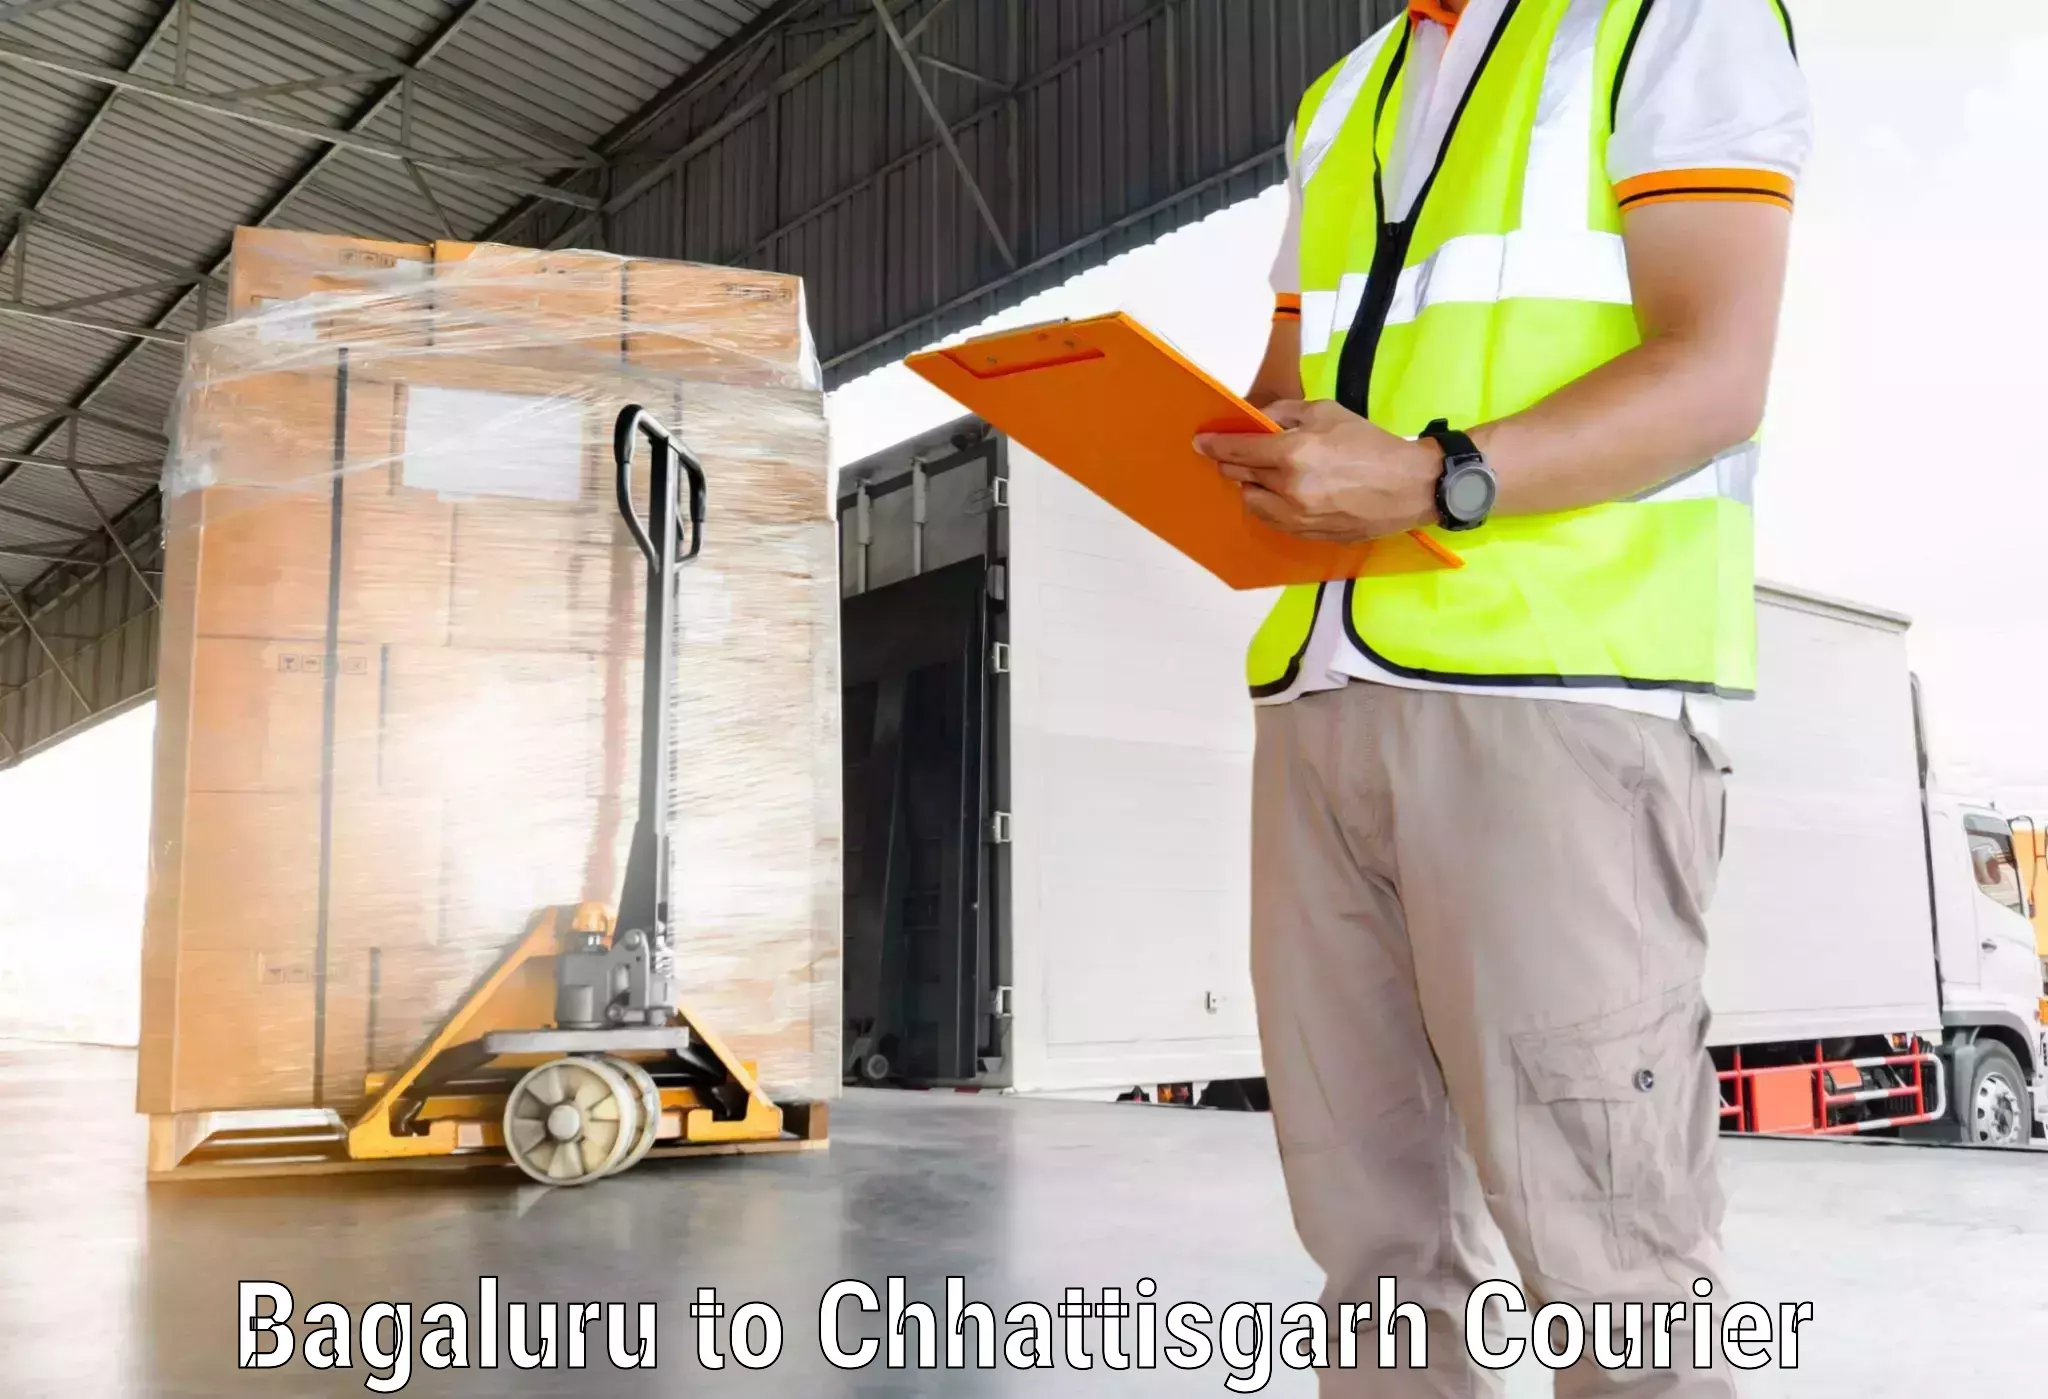 State-of-the-art courier technology Bagaluru to Bargidih